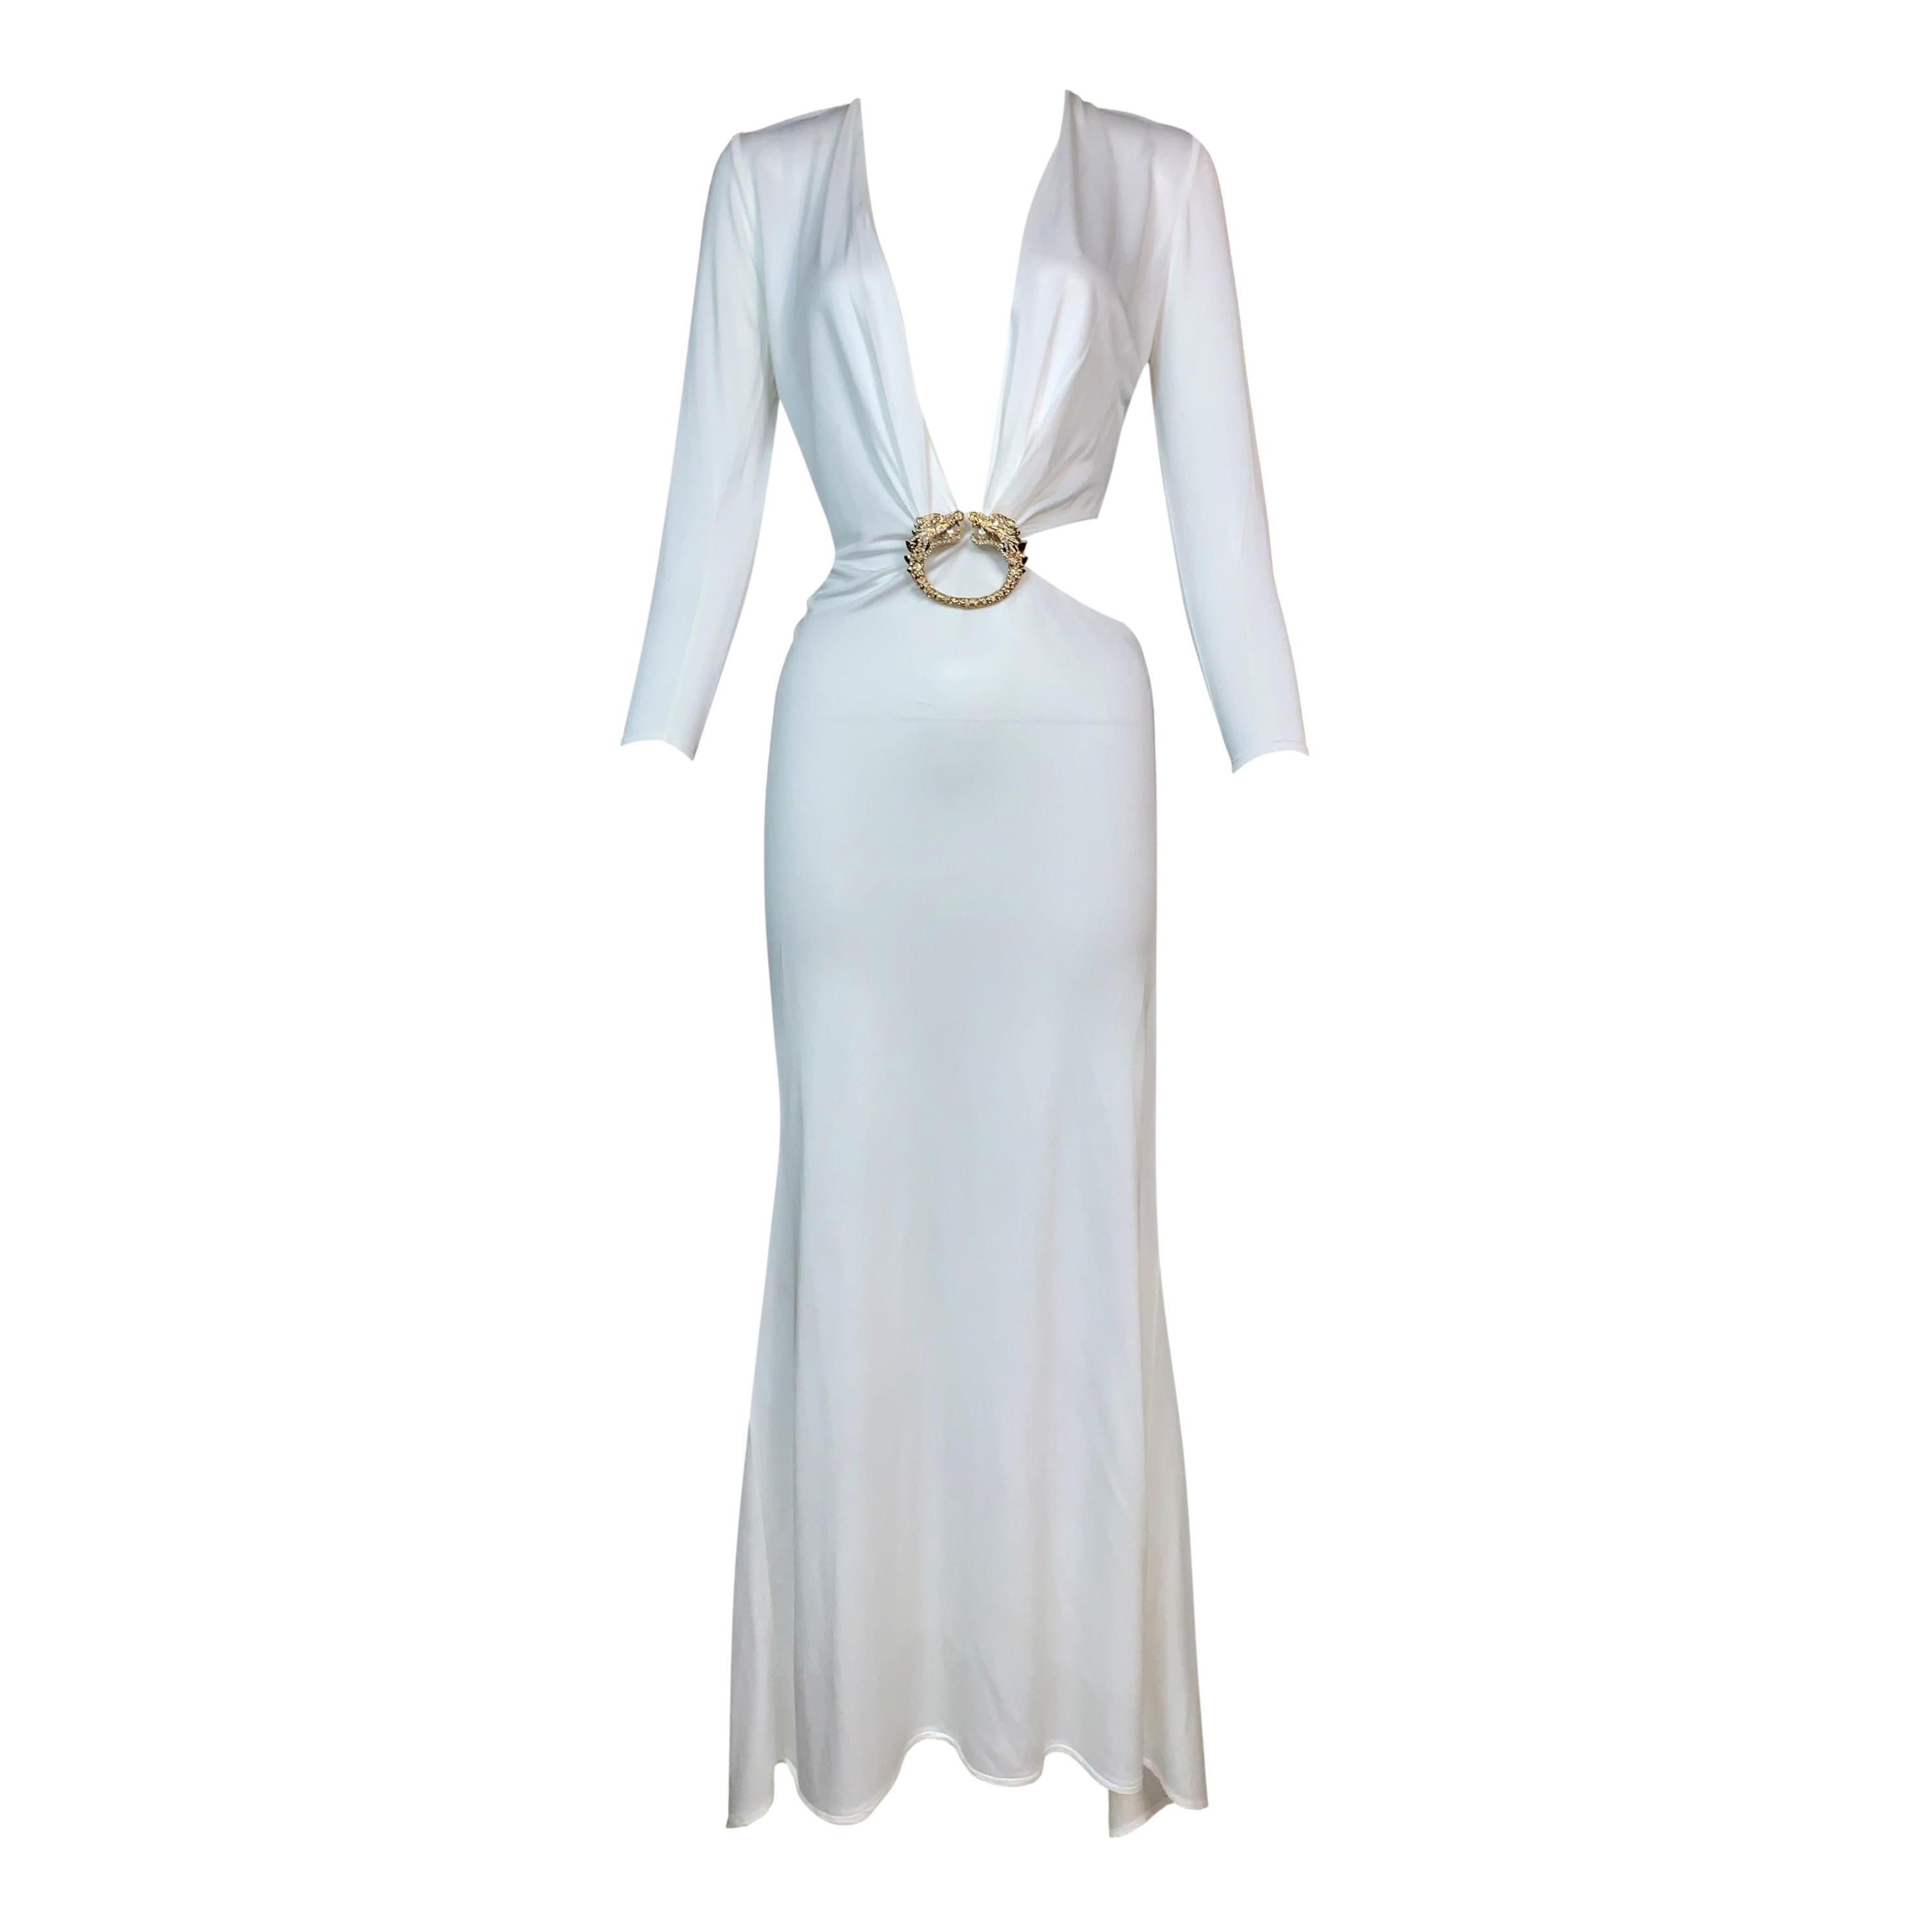 F/W 2004 Gucci by Tom Ford Runway White Plunging Dragon Gown Dress